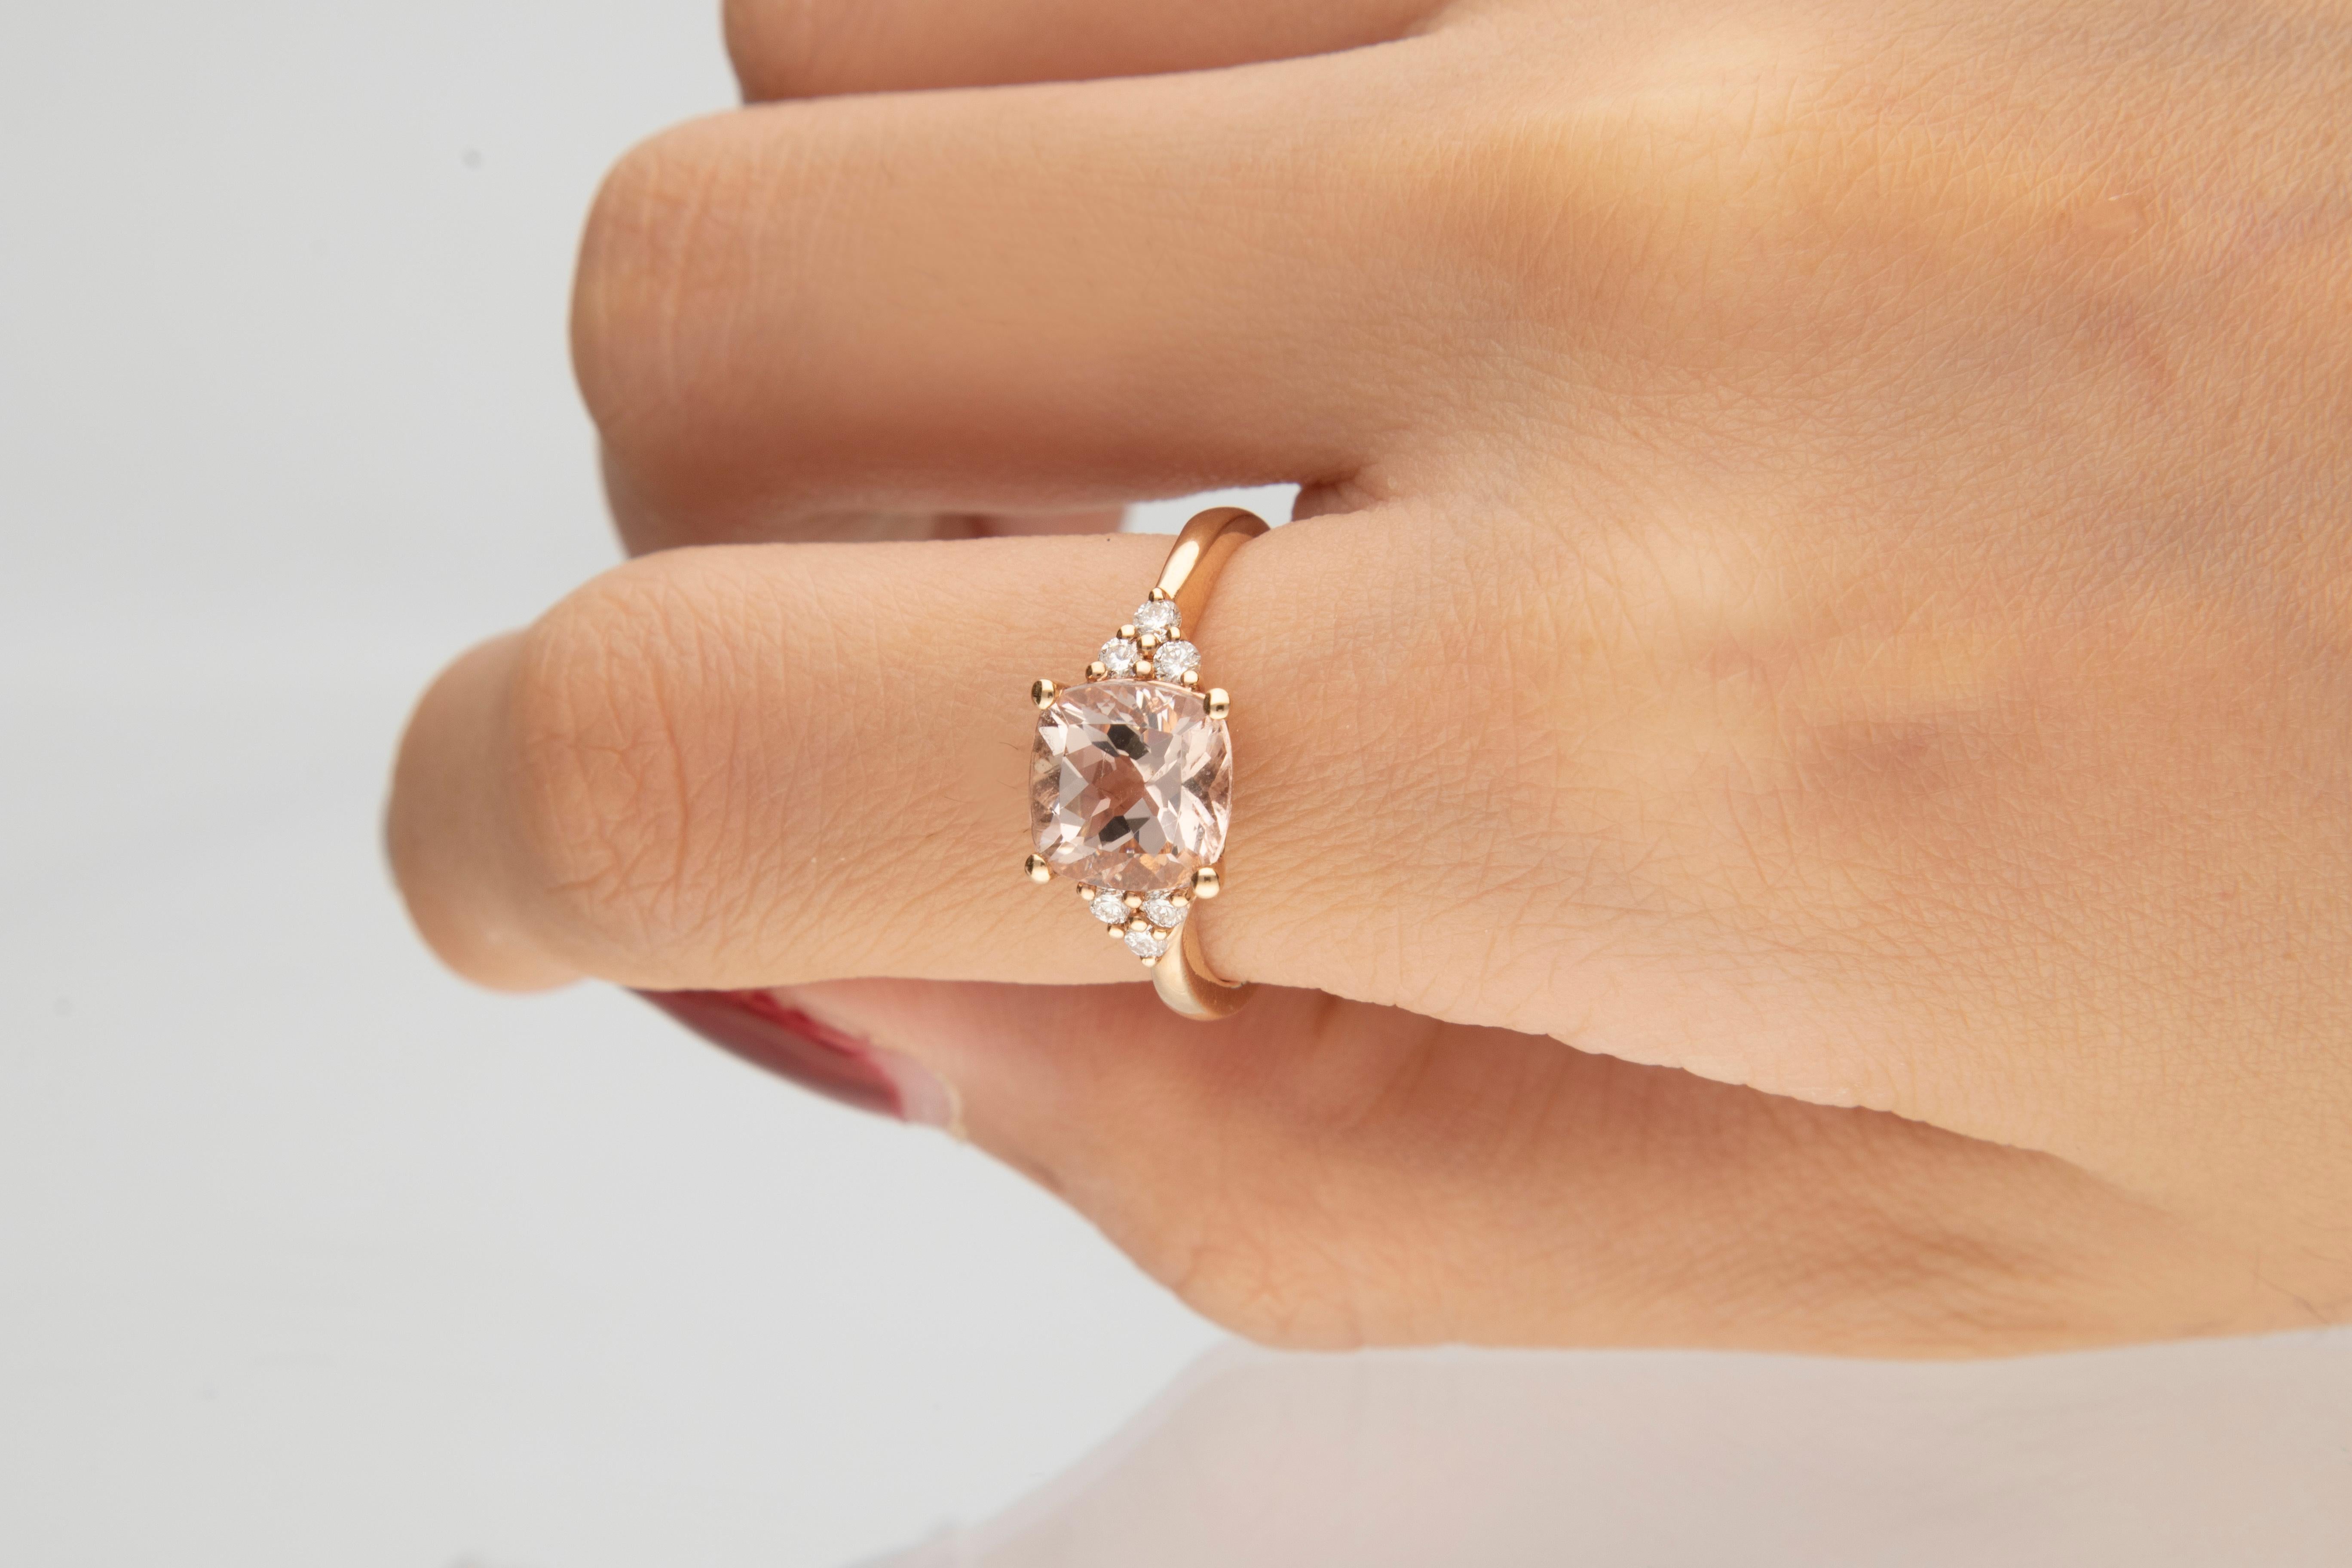 This beautiful Morganite ring is crafted in 14-karat Rose gold and features a 2.04 carat Genuine Morganite, 6 Cushion-cut White Diamonds in GH- I1 quality with 6 Pcs 0.16 cts in prong-setting. This ring comes in sizes 6 to 9, and it is a perfect